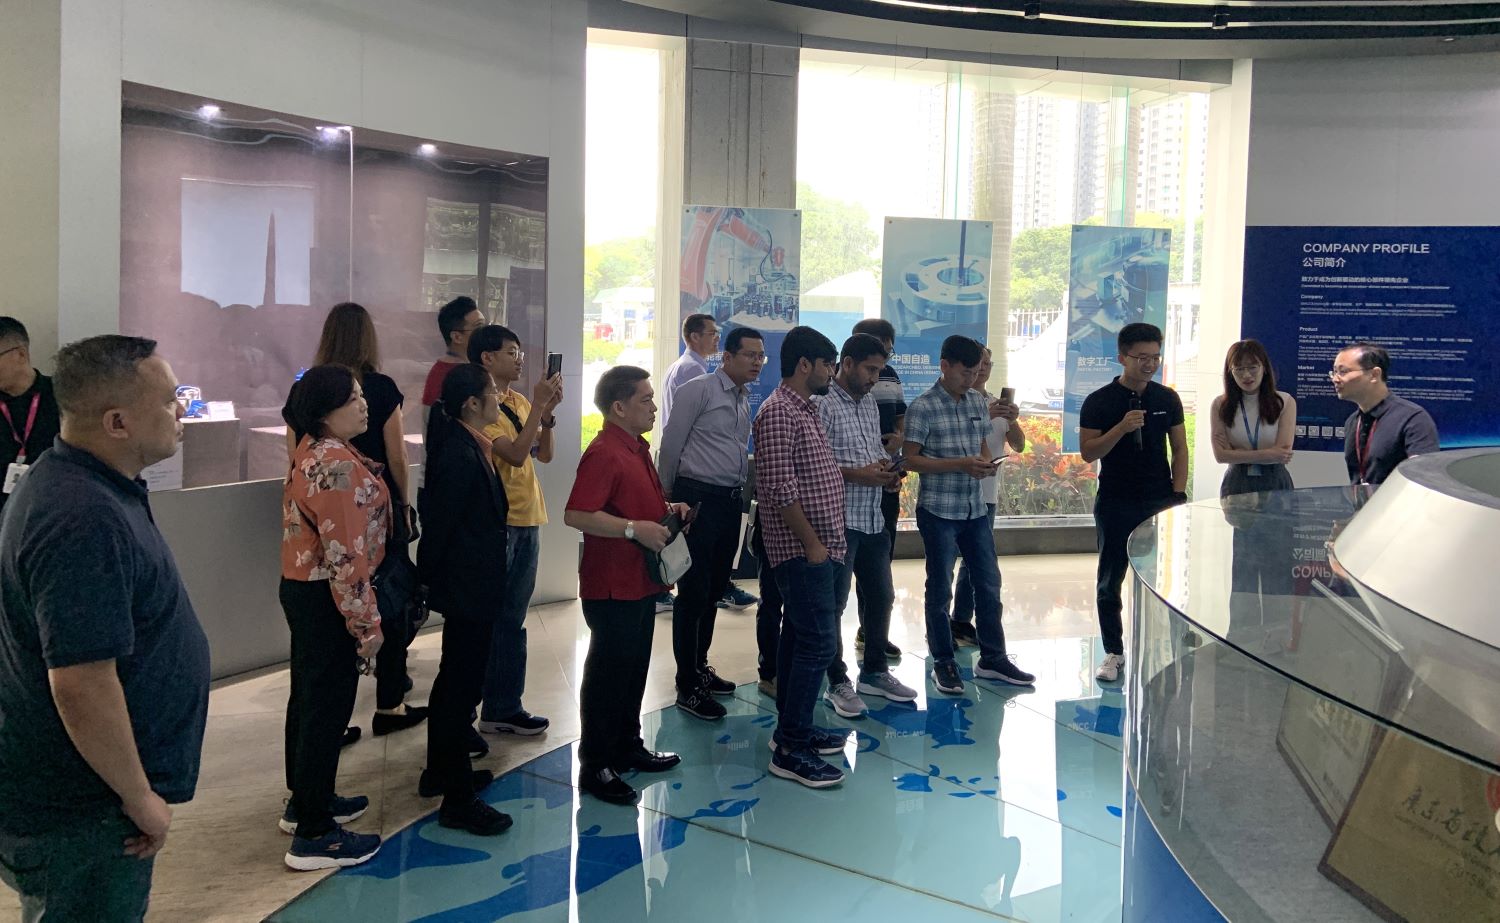 The group visited the showroom of GMCC, one of the biggest compressor manufacturers in China.